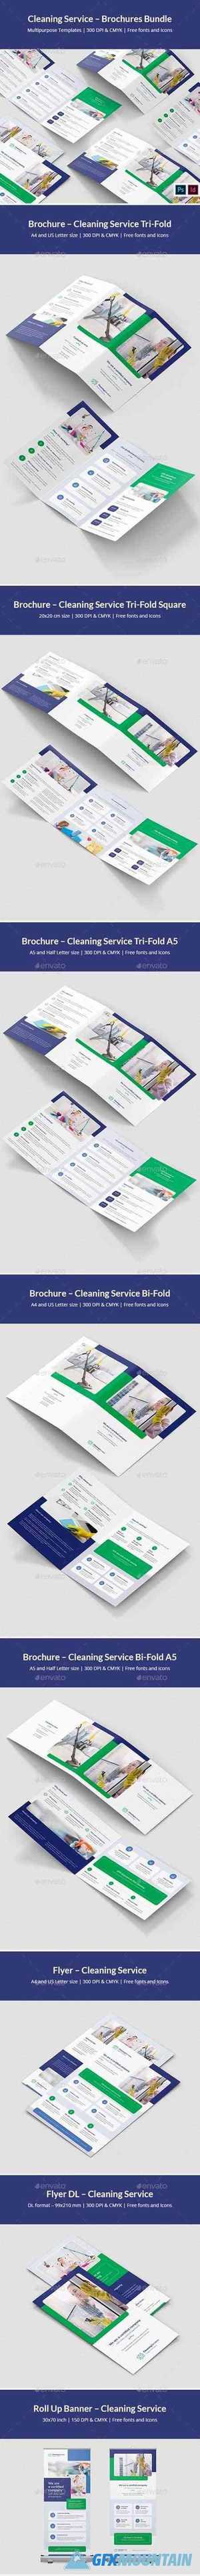 Cleaning Service – Brochures Bundle Print Templates 8 in 1 25675641